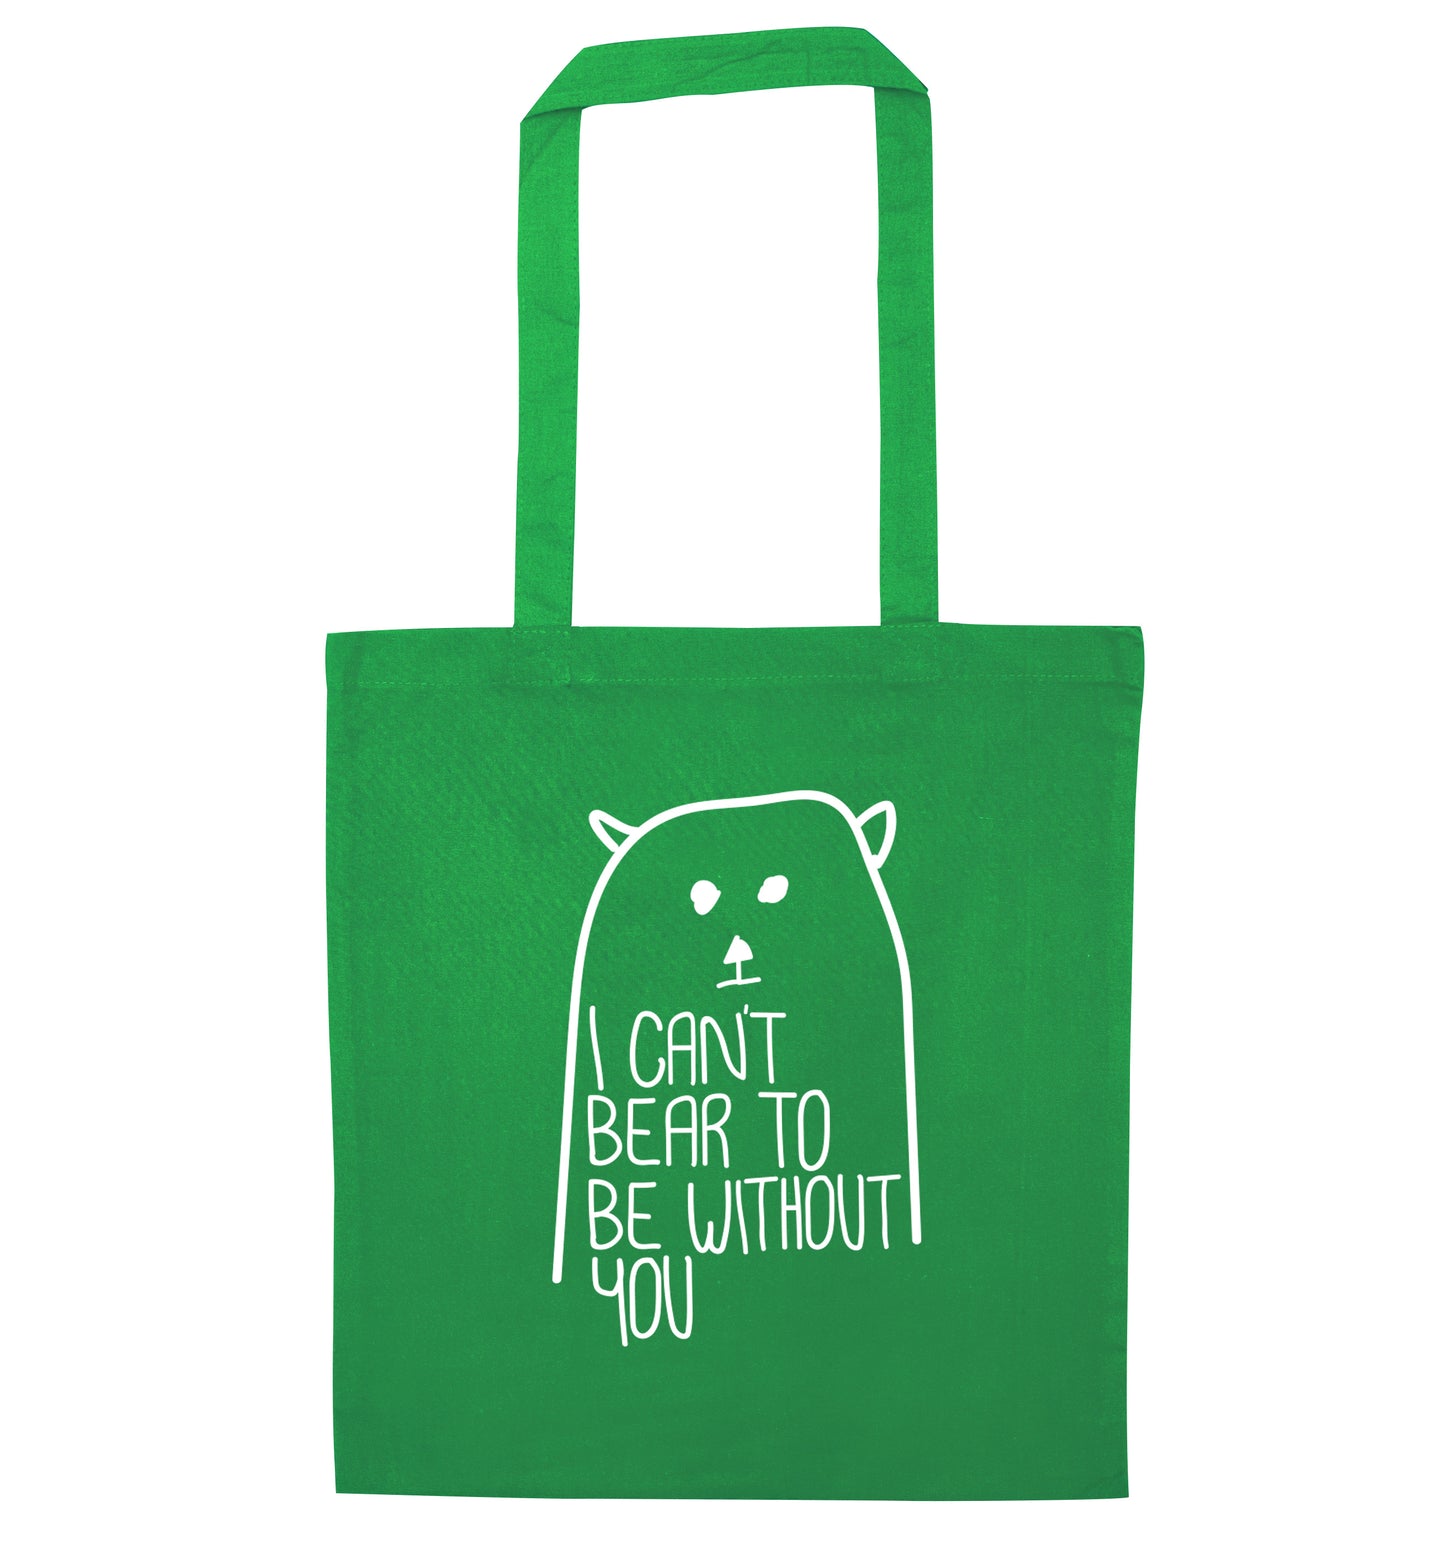 I can't bear to be without you green tote bag